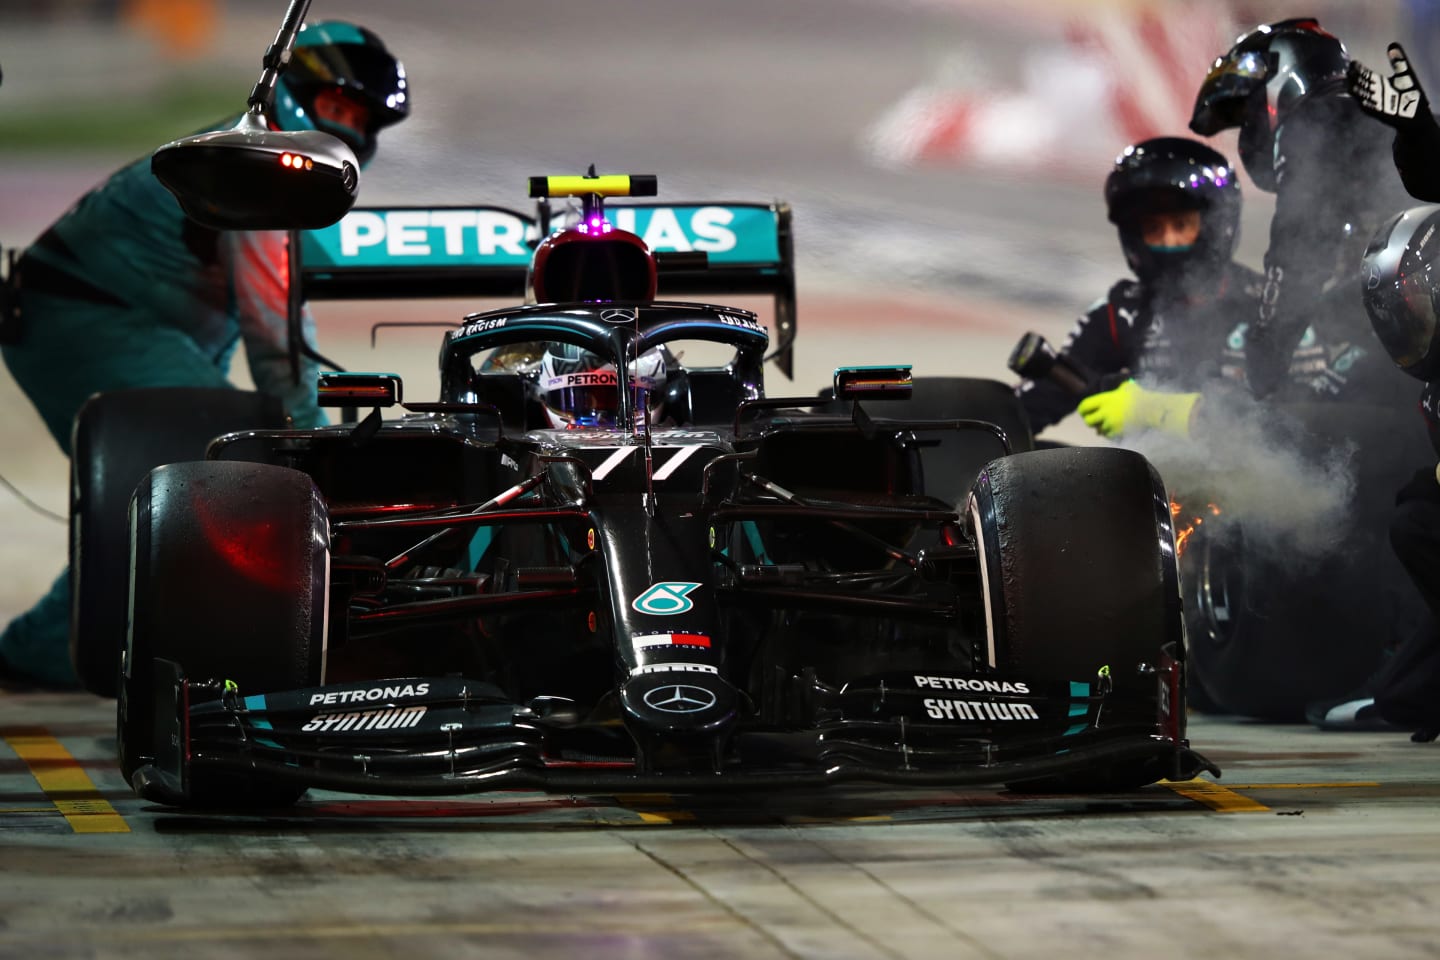 BAHRAIN, BAHRAIN - DECEMBER 06: Valtteri Bottas of Finland driving the (77) Mercedes AMG Petronas F1 Team Mercedes W11 makes a pitstop as smoke pour from his front left brake during the F1 Grand Prix of Sakhir at Bahrain International Circuit on December 06, 2020 in Bahrain, Bahrain. (Photo by Mark Thompson/Getty Images)